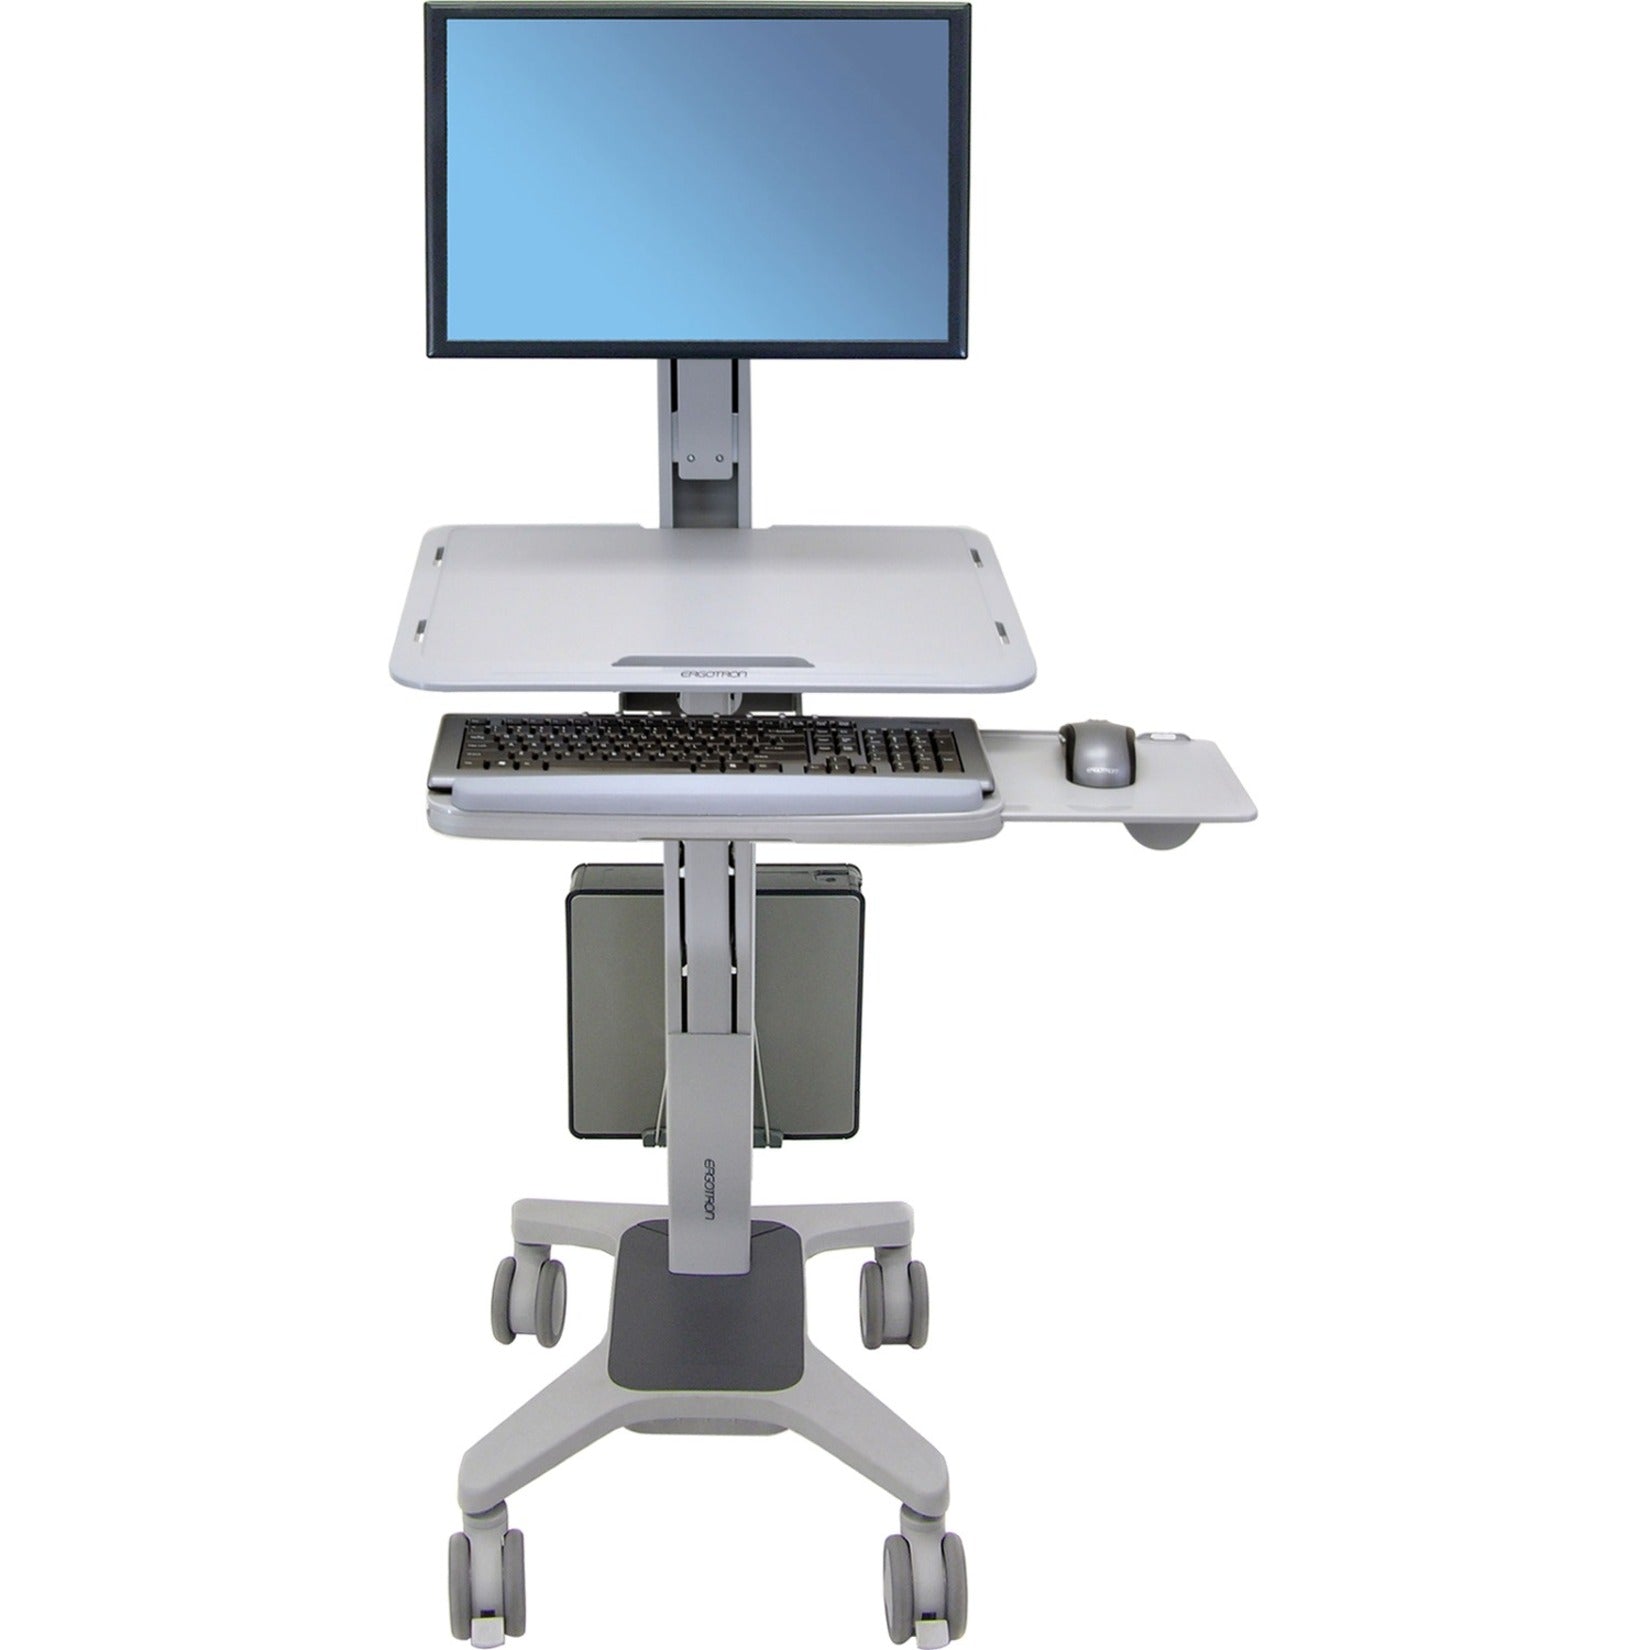 Ergotron 24-198-055 WorkFit-C Single LD Sit-Stand Workstation, On-Demand Sit-Stand Workstation for Improved Energy and Productivity